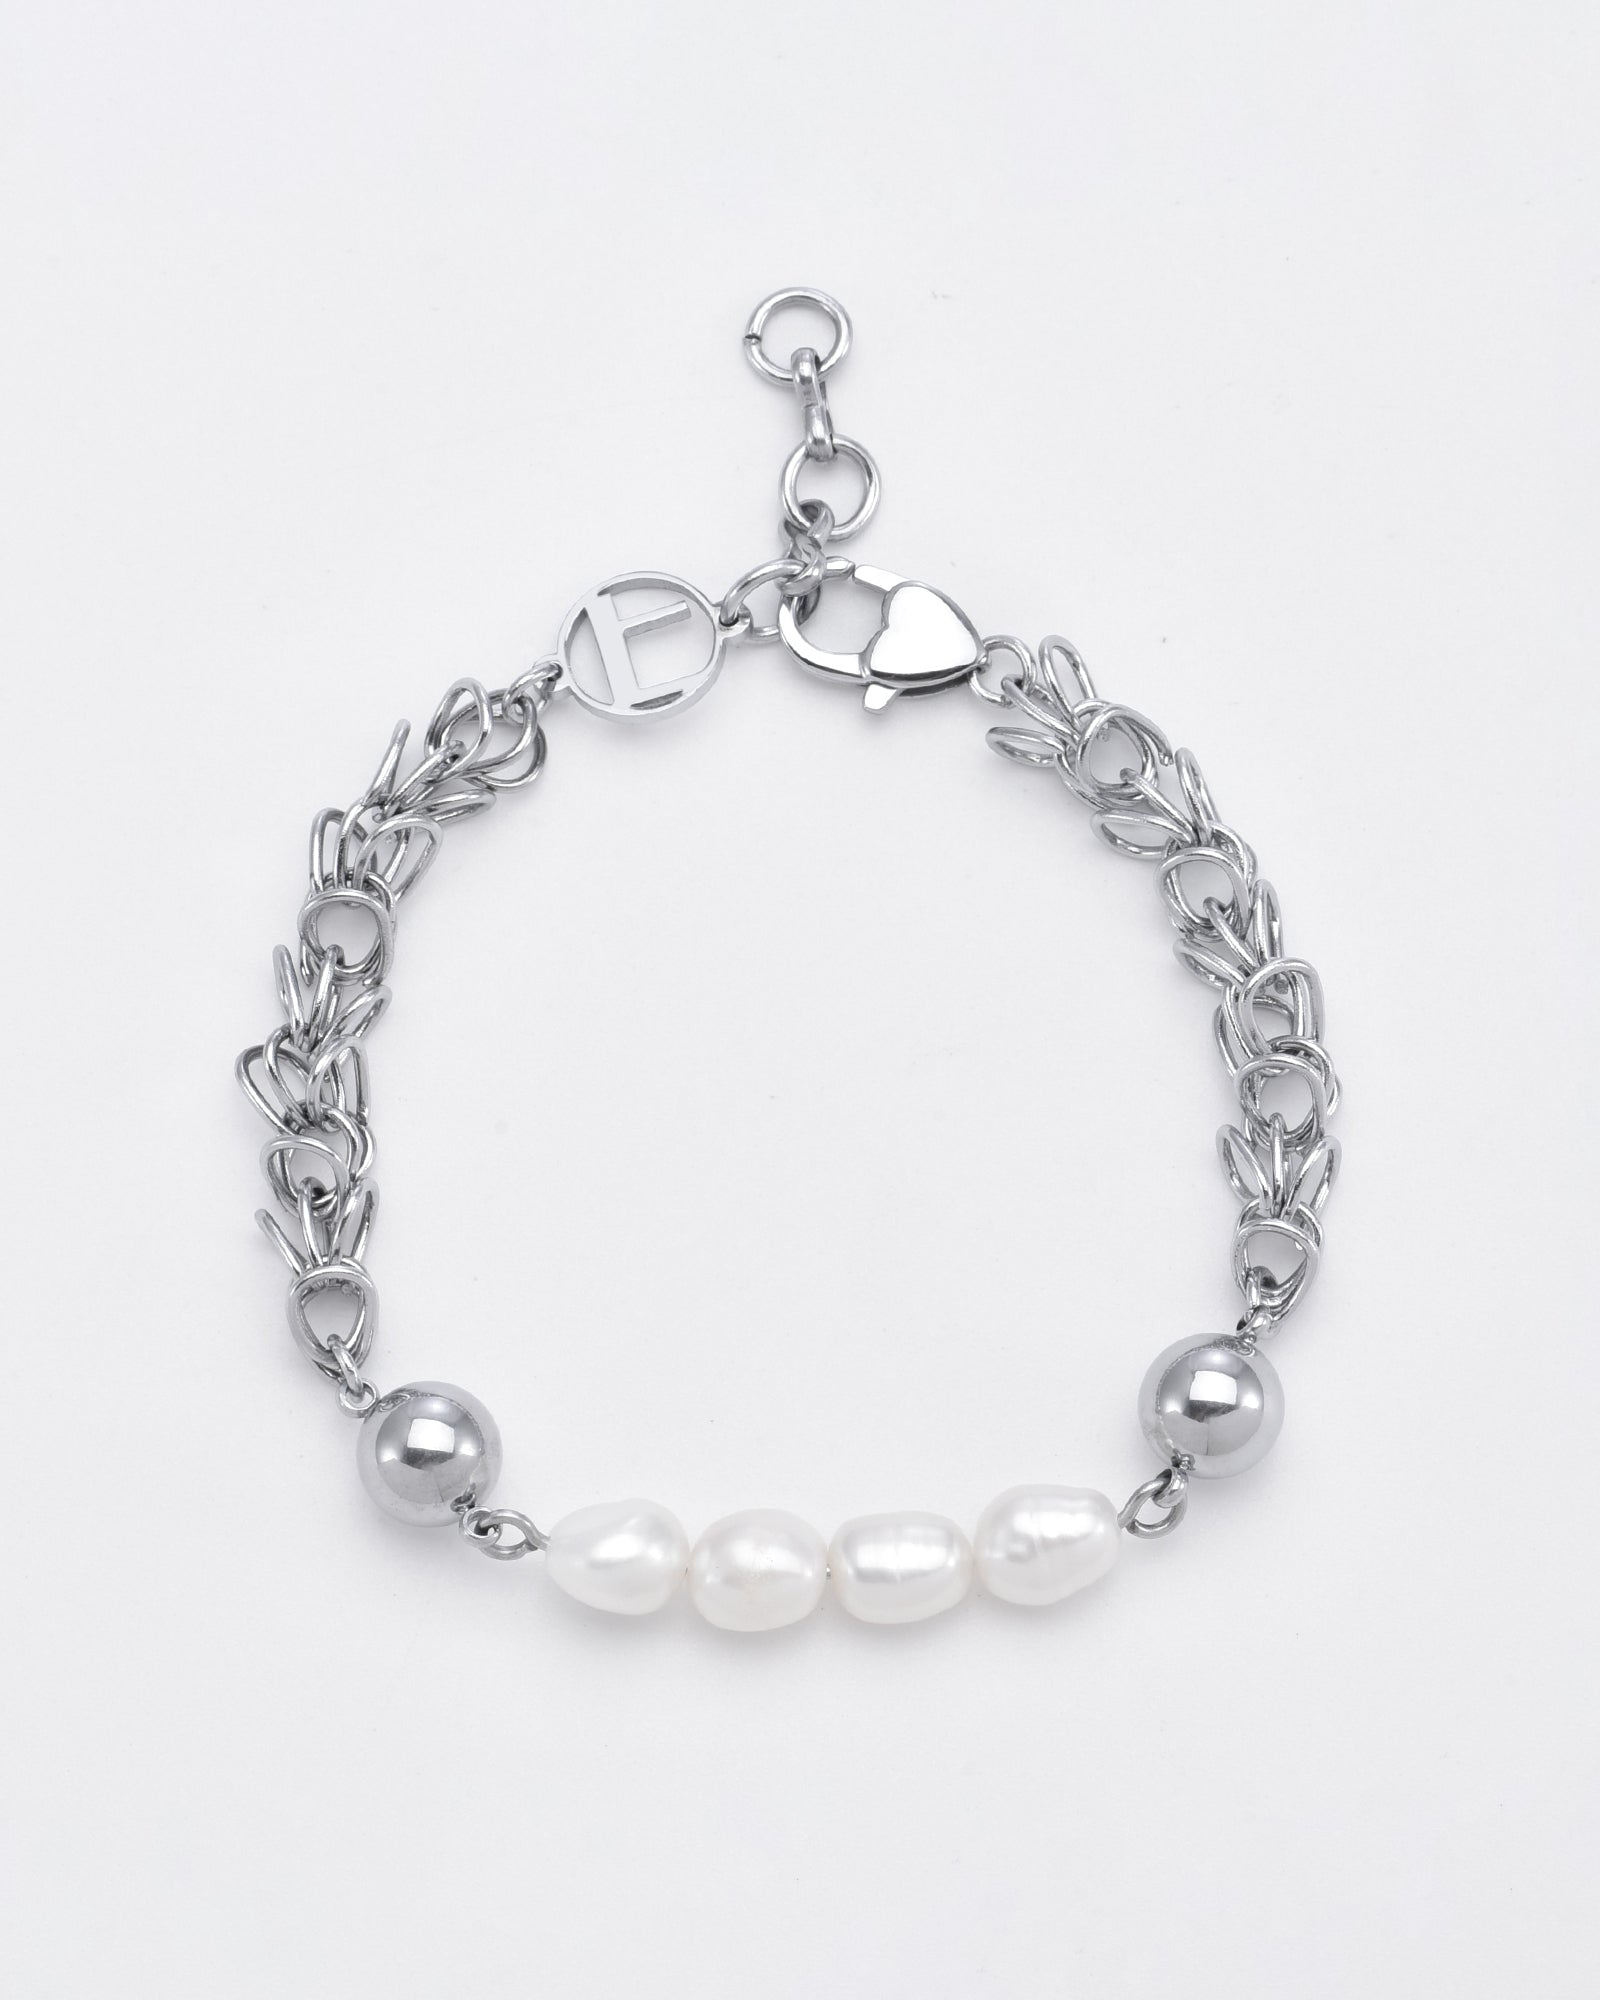 The For Art's Sake® Athena Bracelet Silver exudes refined elegance with a chain of interlinked hearts and a clasp adorned with a heart-shaped lock. At its center, the bracelet showcases five freshwater pearls and one silver bead at each end, offering an elegant contrast to the metallic chain.